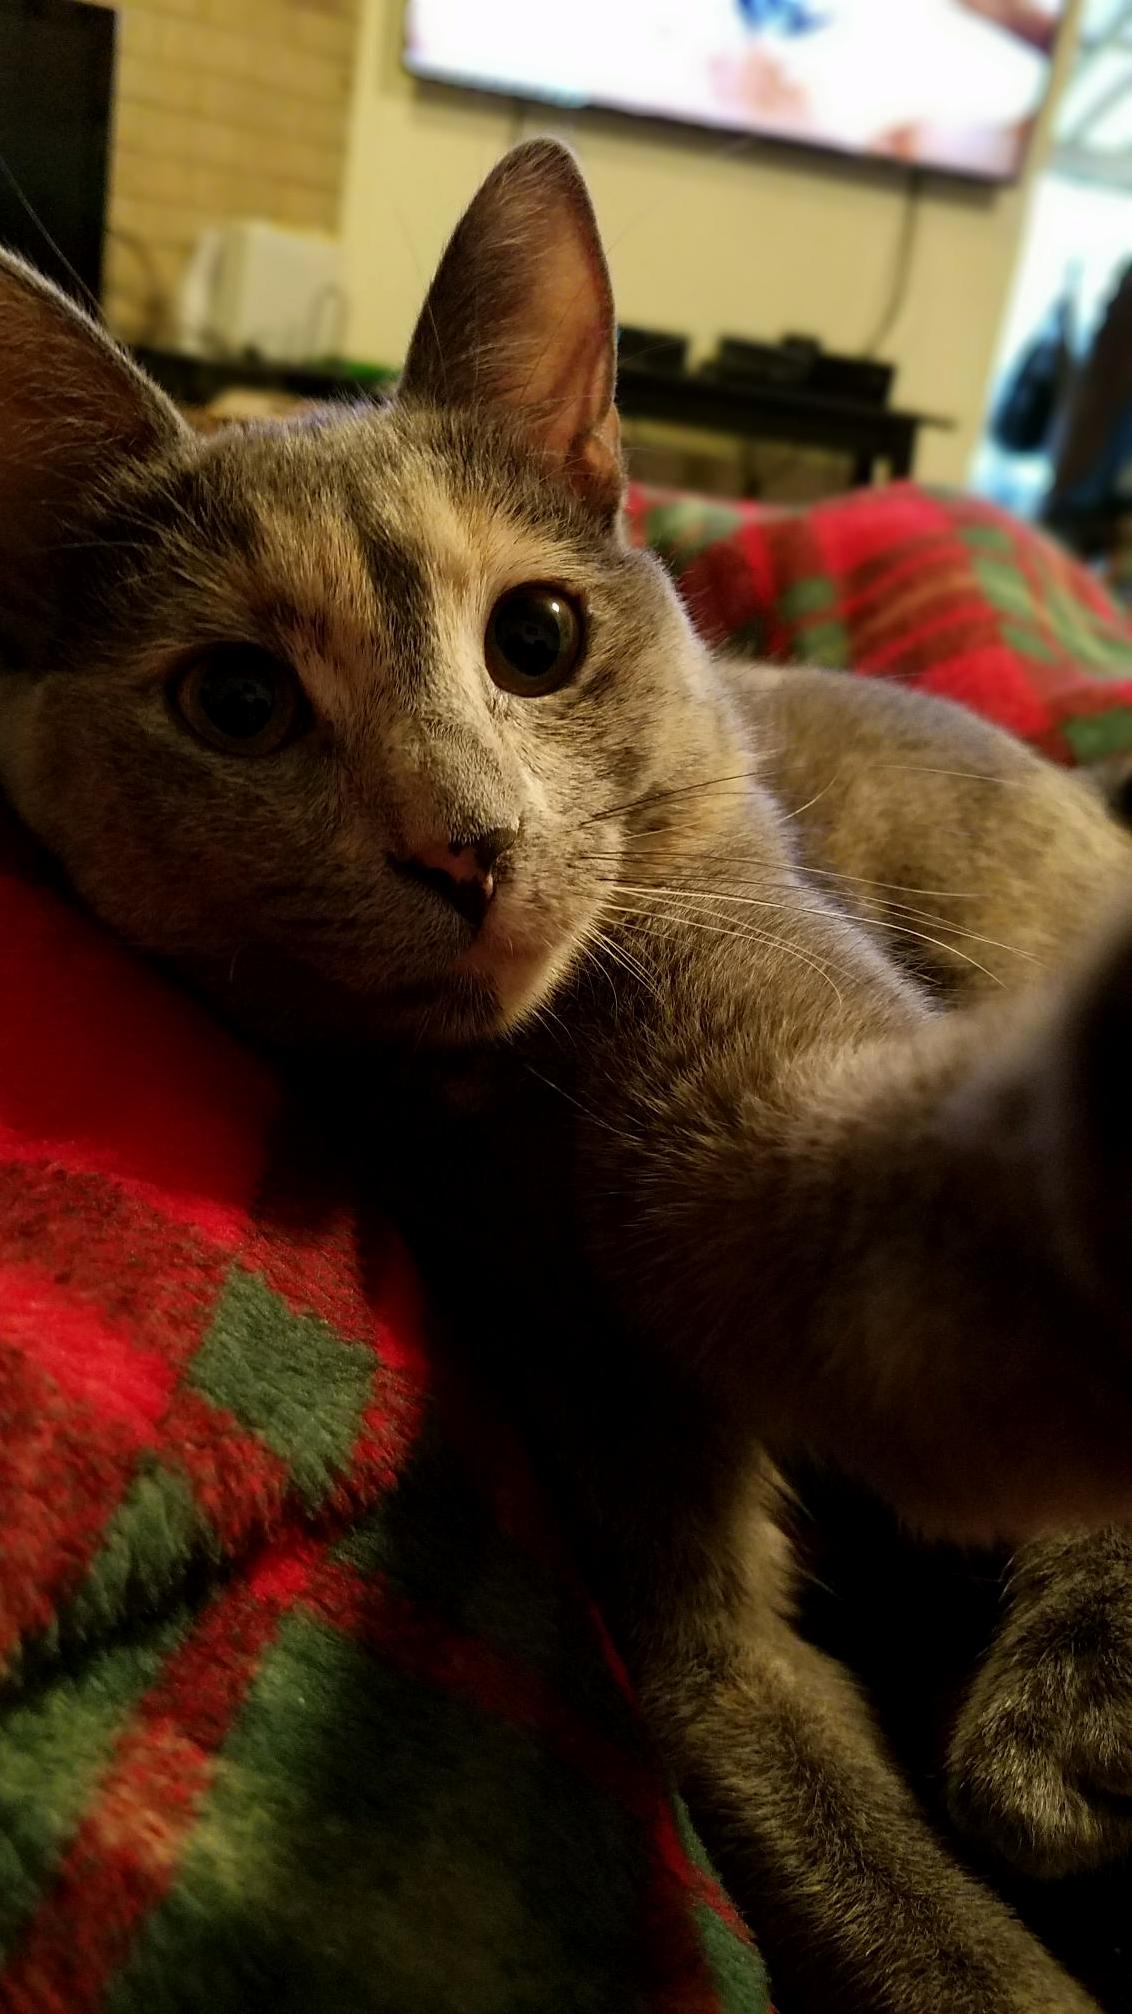 For national pet day here is ellie taking a selfie.